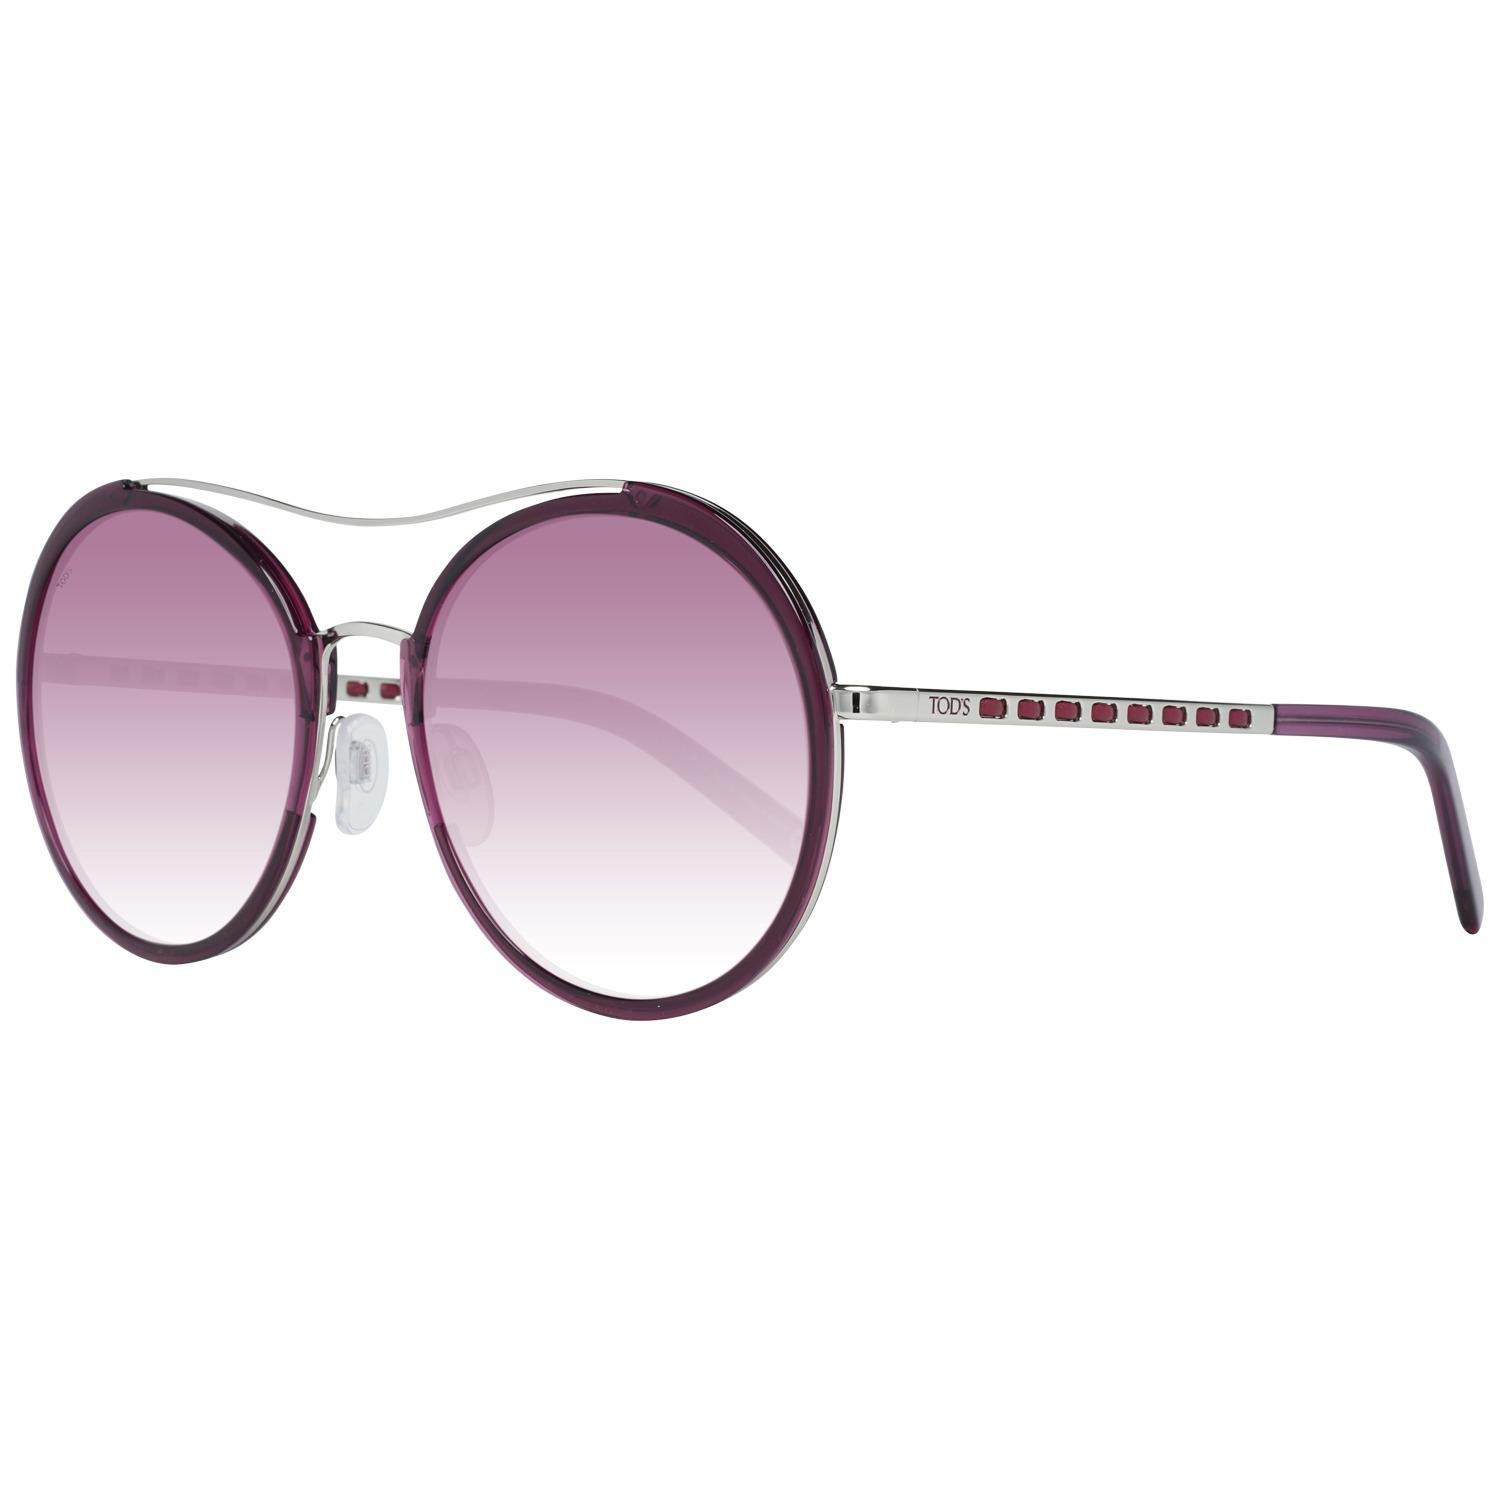 Details

MATERIAL: Metal & Leather

COLOR: Purple

MODEL: TO0238 5774Z

GENDER: Women

COUNTRY OF MANUFACTURE: Italy

TYPE: Sunglasses

ORIGINAL CASE?: Yes

STYLE: Oval

OCCASION: Casual

FEATURES: Lightweight

LENS COLOR: Purple

LENS TECHNOLOGY: